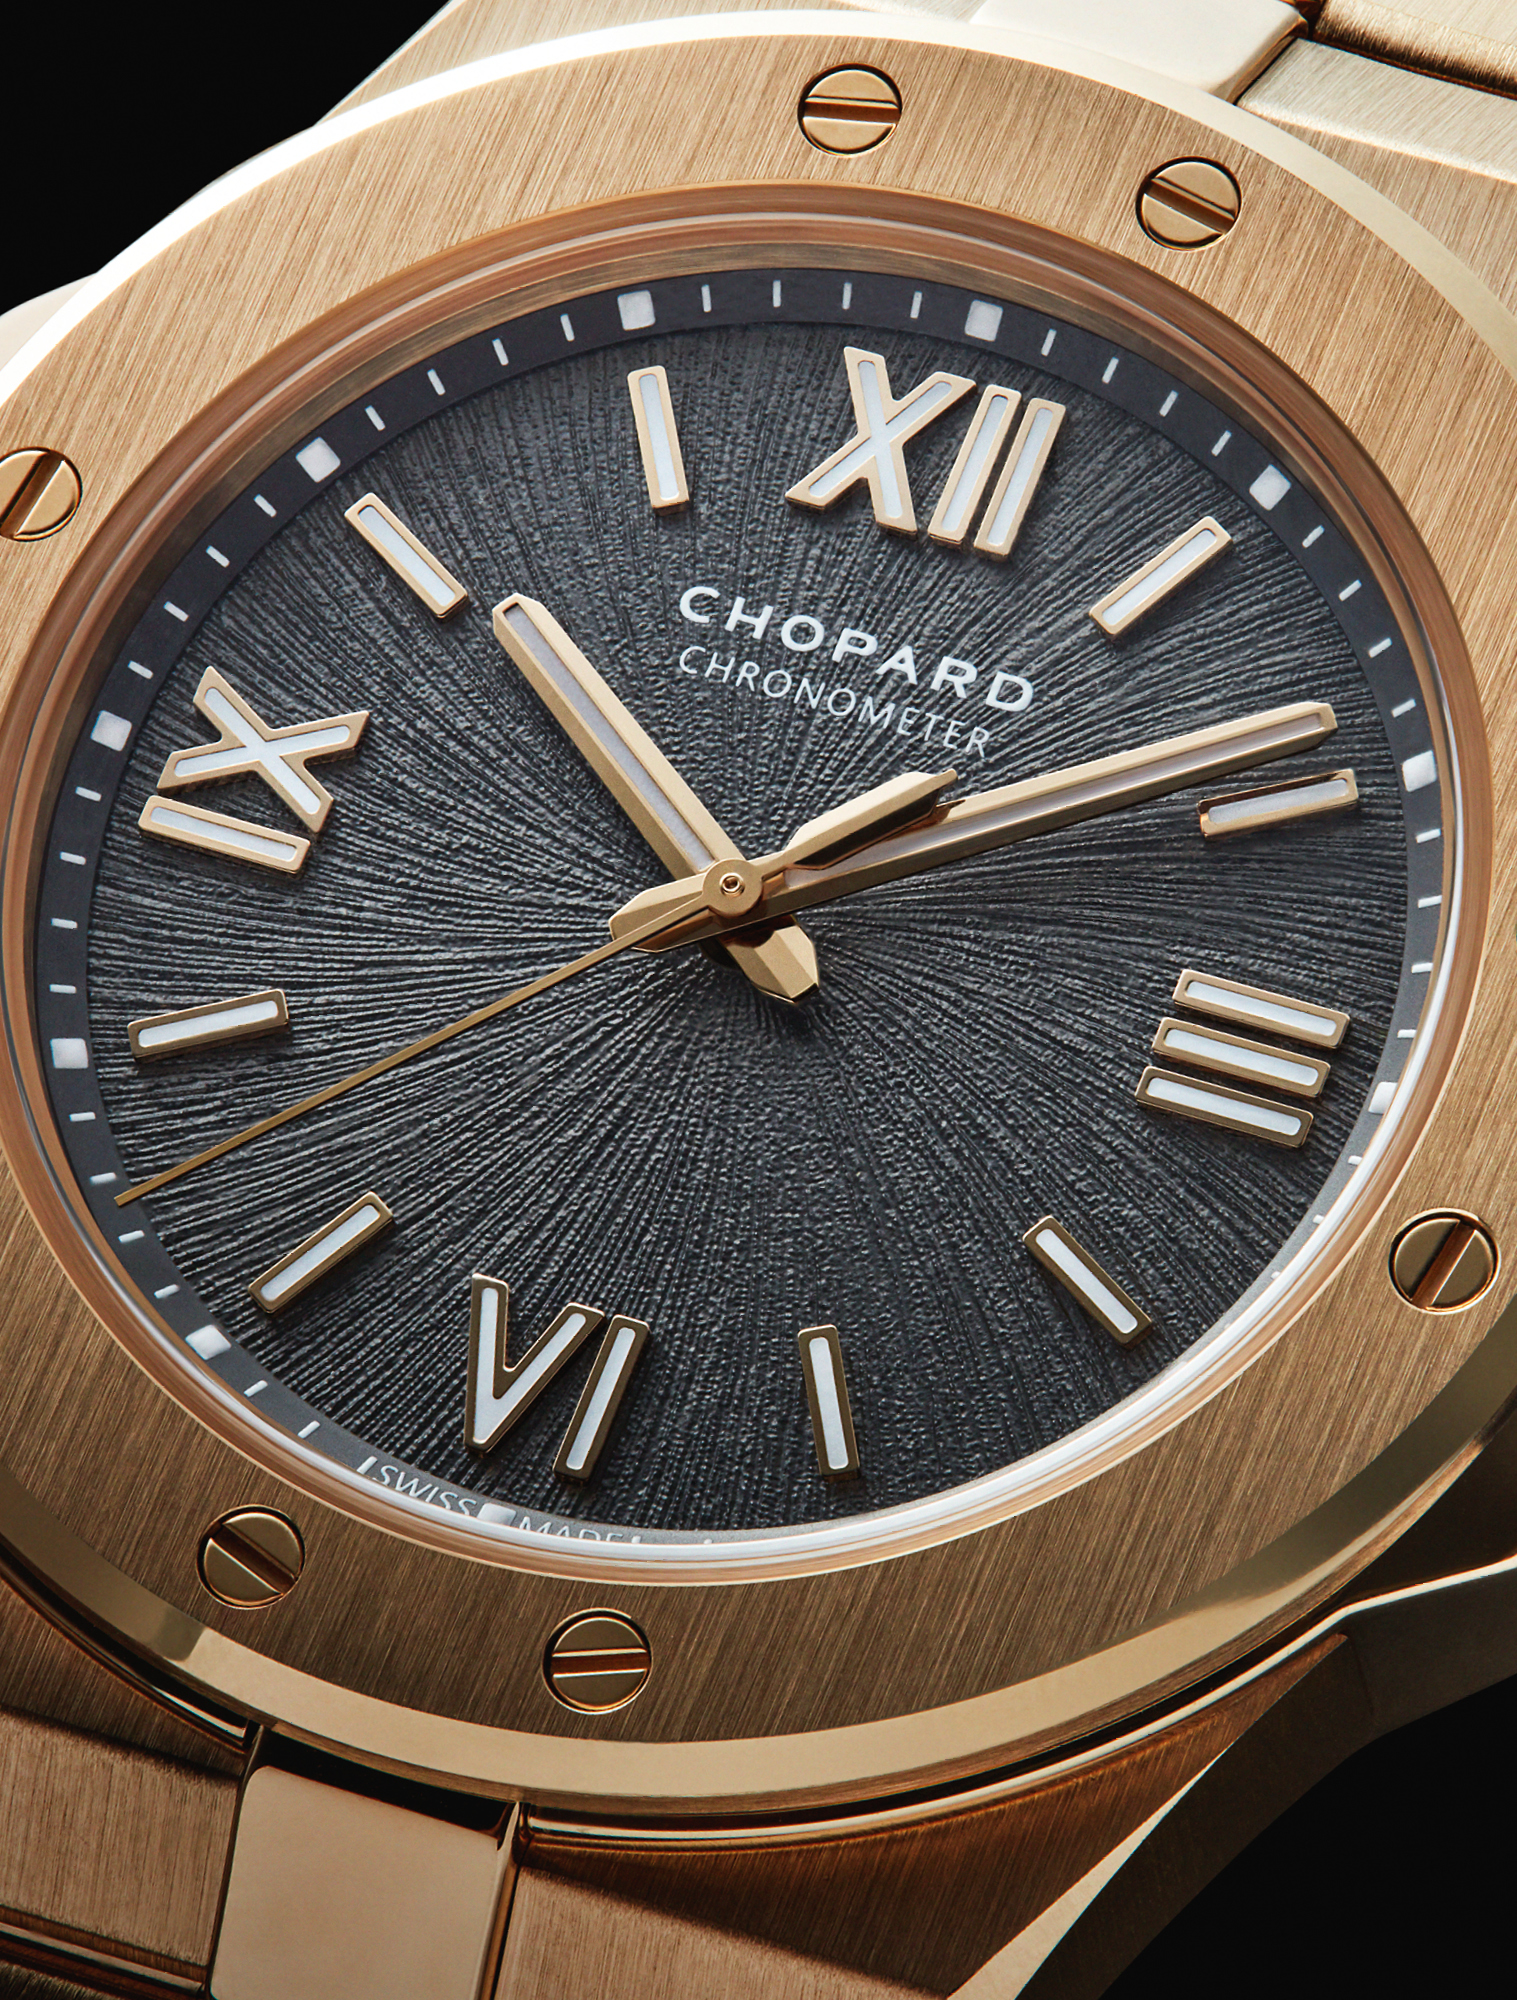 Inspired by the majesty of the Alps and the beauty of the white-tailed eagle, Chopard’s 36mm 18ct rose gold watch from the new Alpine Eagle collection features a textured bernina grey dial evoking an eagle’s iris. £POA, CHOPARD